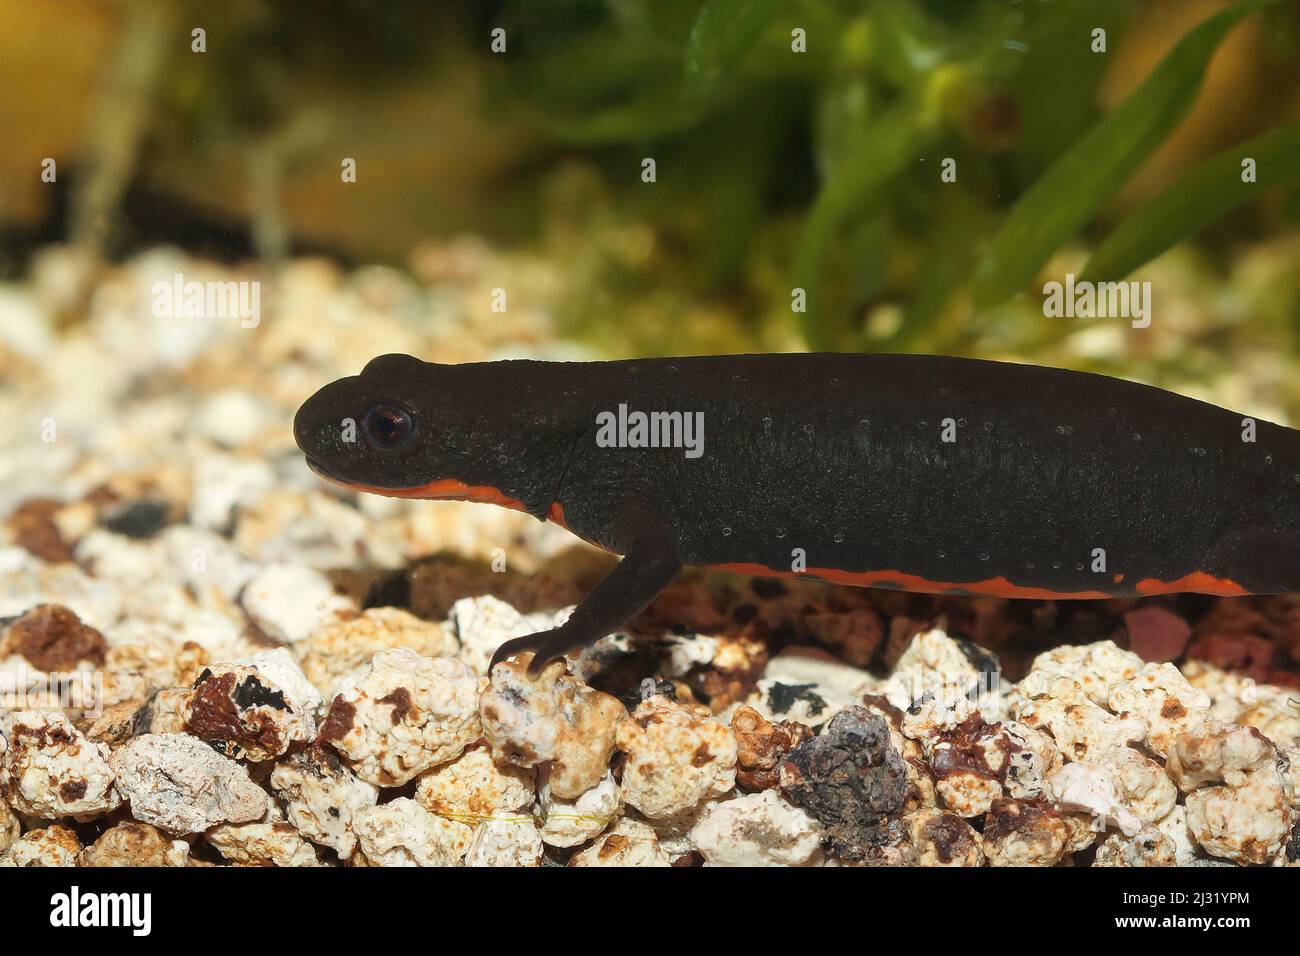 Closeup on an aquatic adult female Chinese fire-bellied newt, Cynops orientalis , underwater on gravel endemic to China Stock Photo